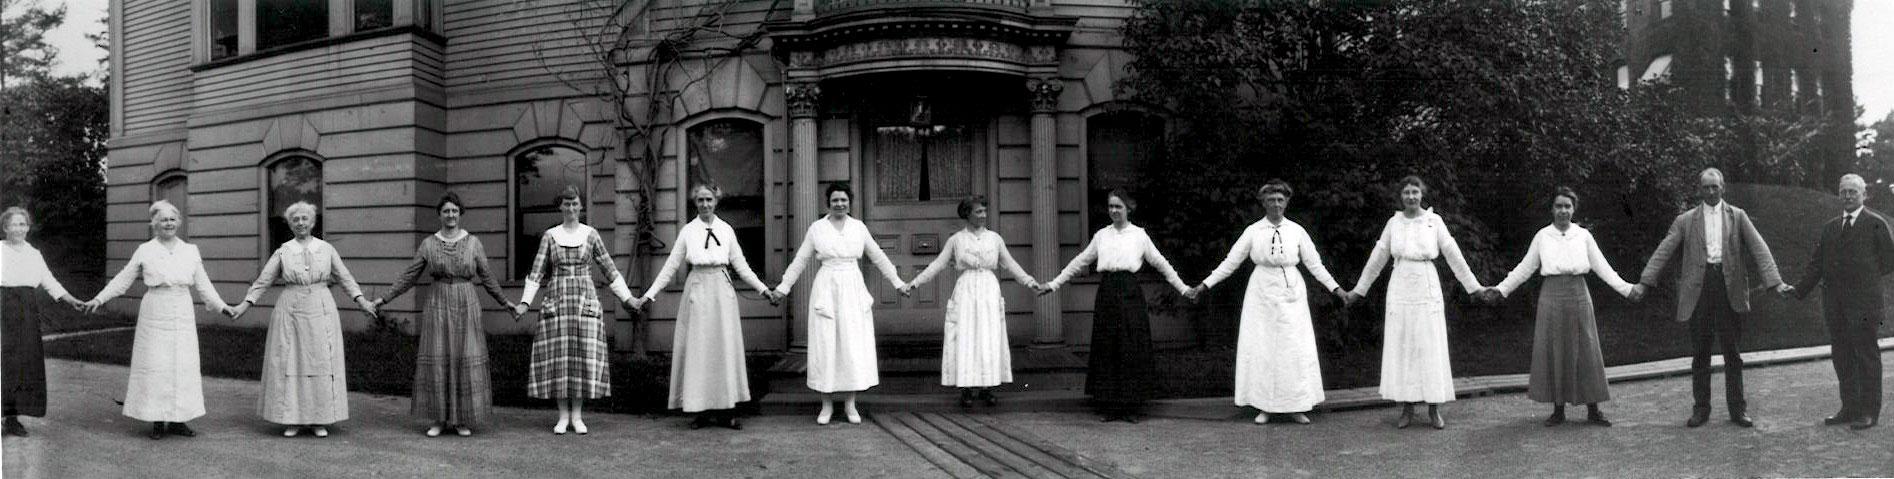 A dozen women hold hands in front of a building on the Harvard campus in 1918. They are all women 